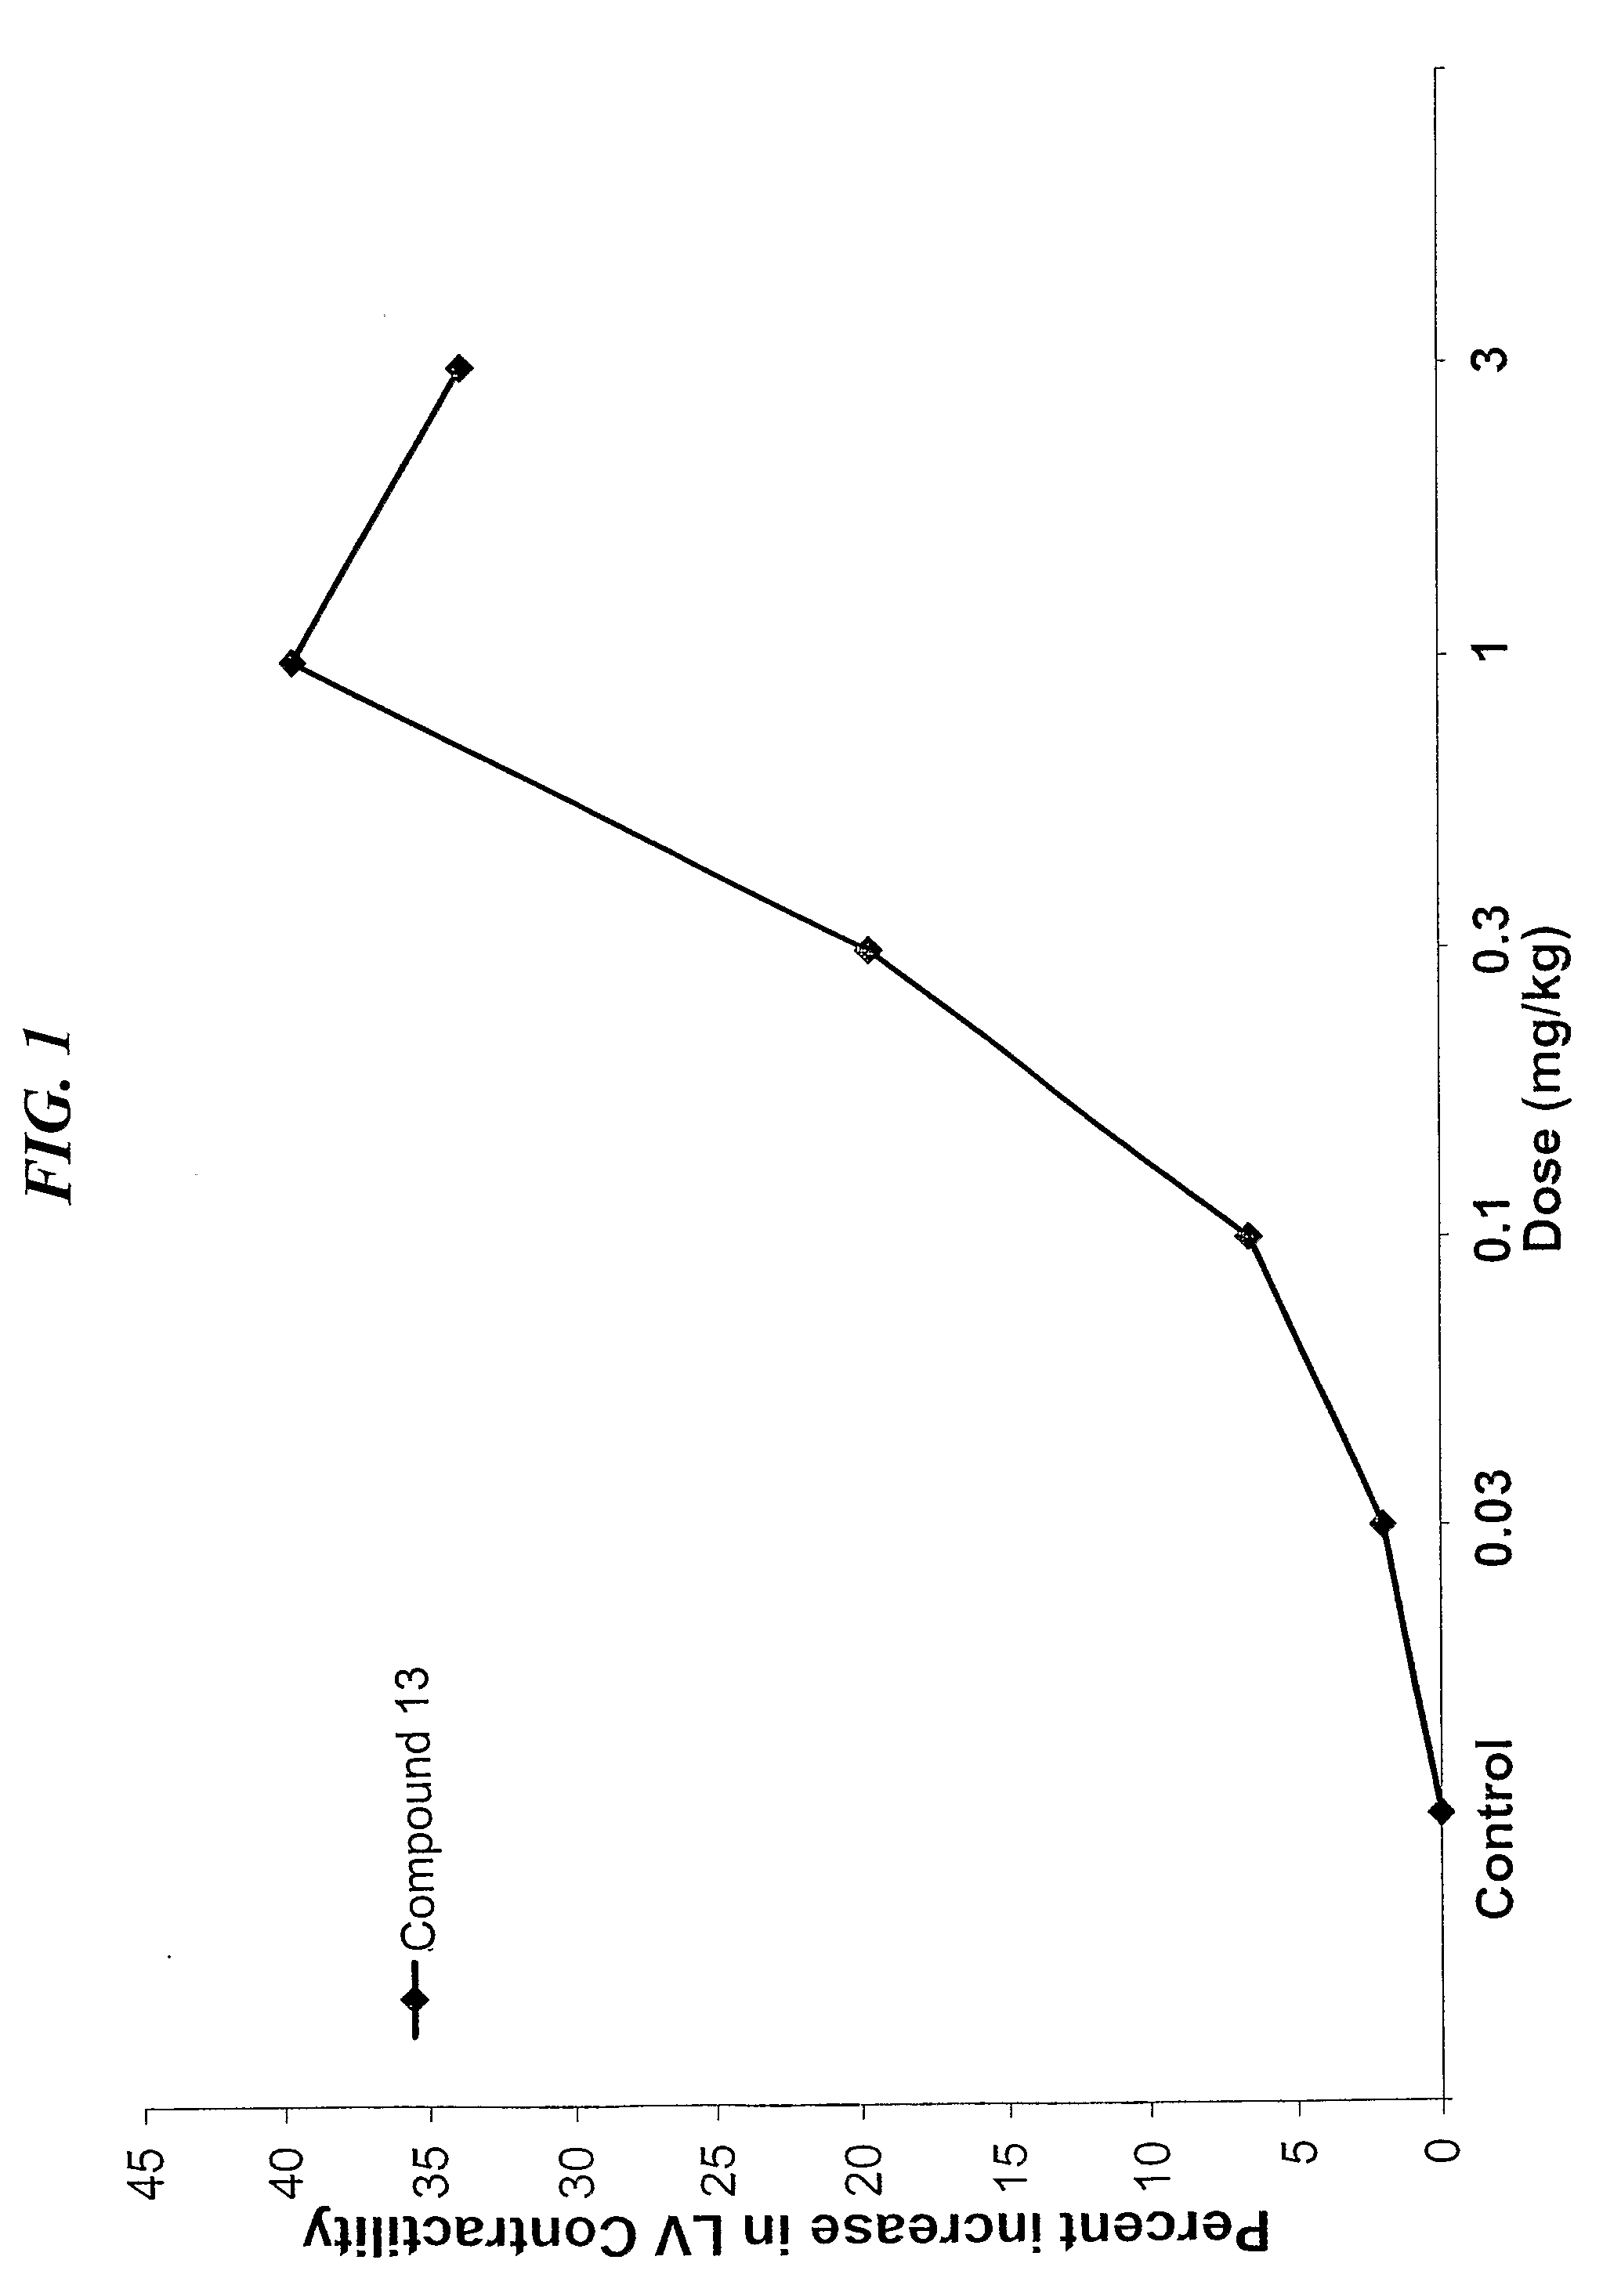 Compounds With Mixed Pde-Inhibitory and Beta-Adrenergic Antagonist or Partial Agonist Activity For Treatment of Heart Failure